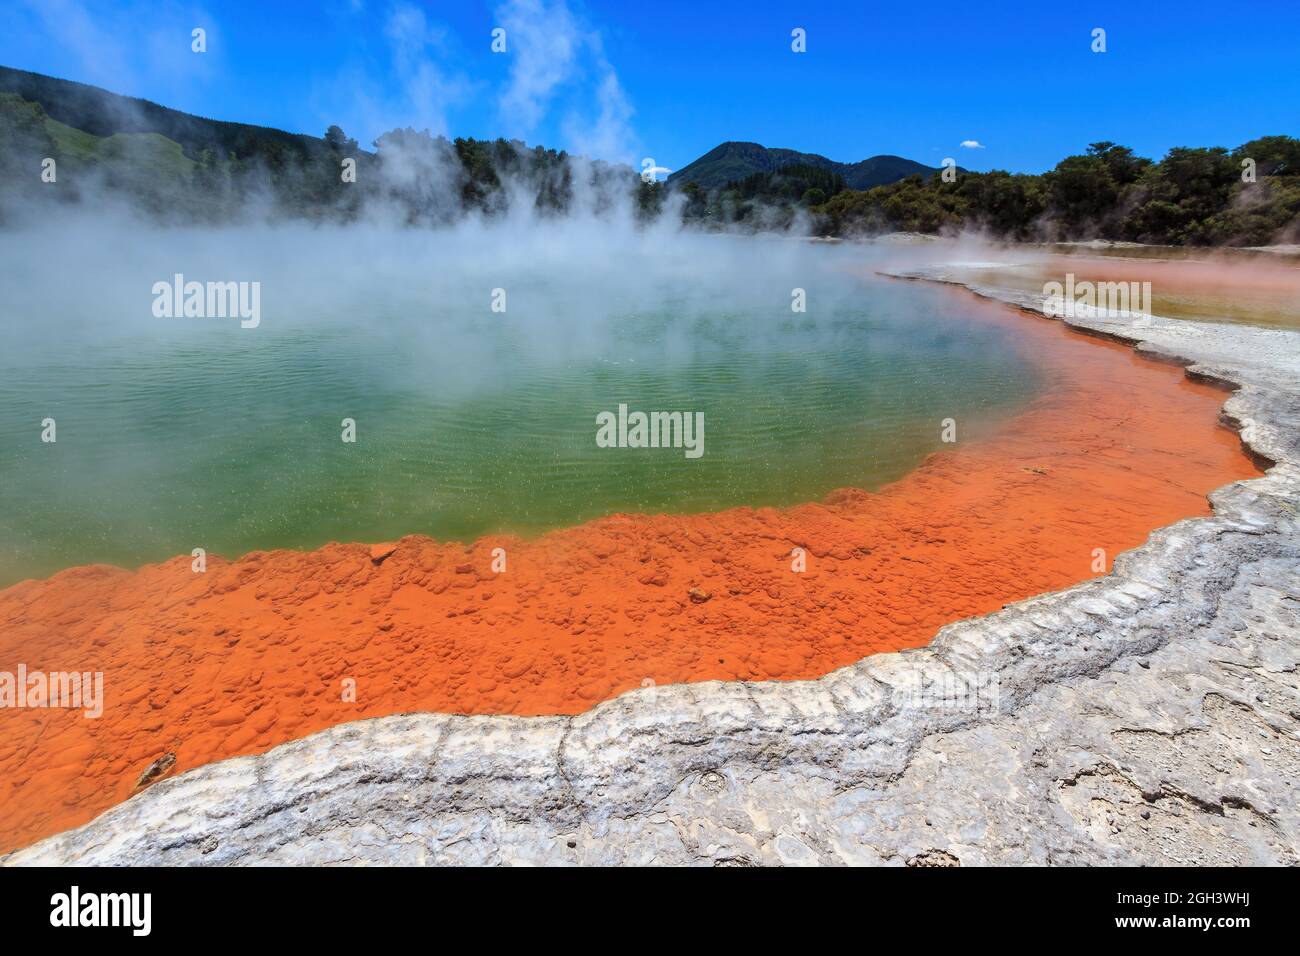 The Champagne Pool, a bubbling hot spring in the Waiotapu geothermal area, New Zealand Stock Photo